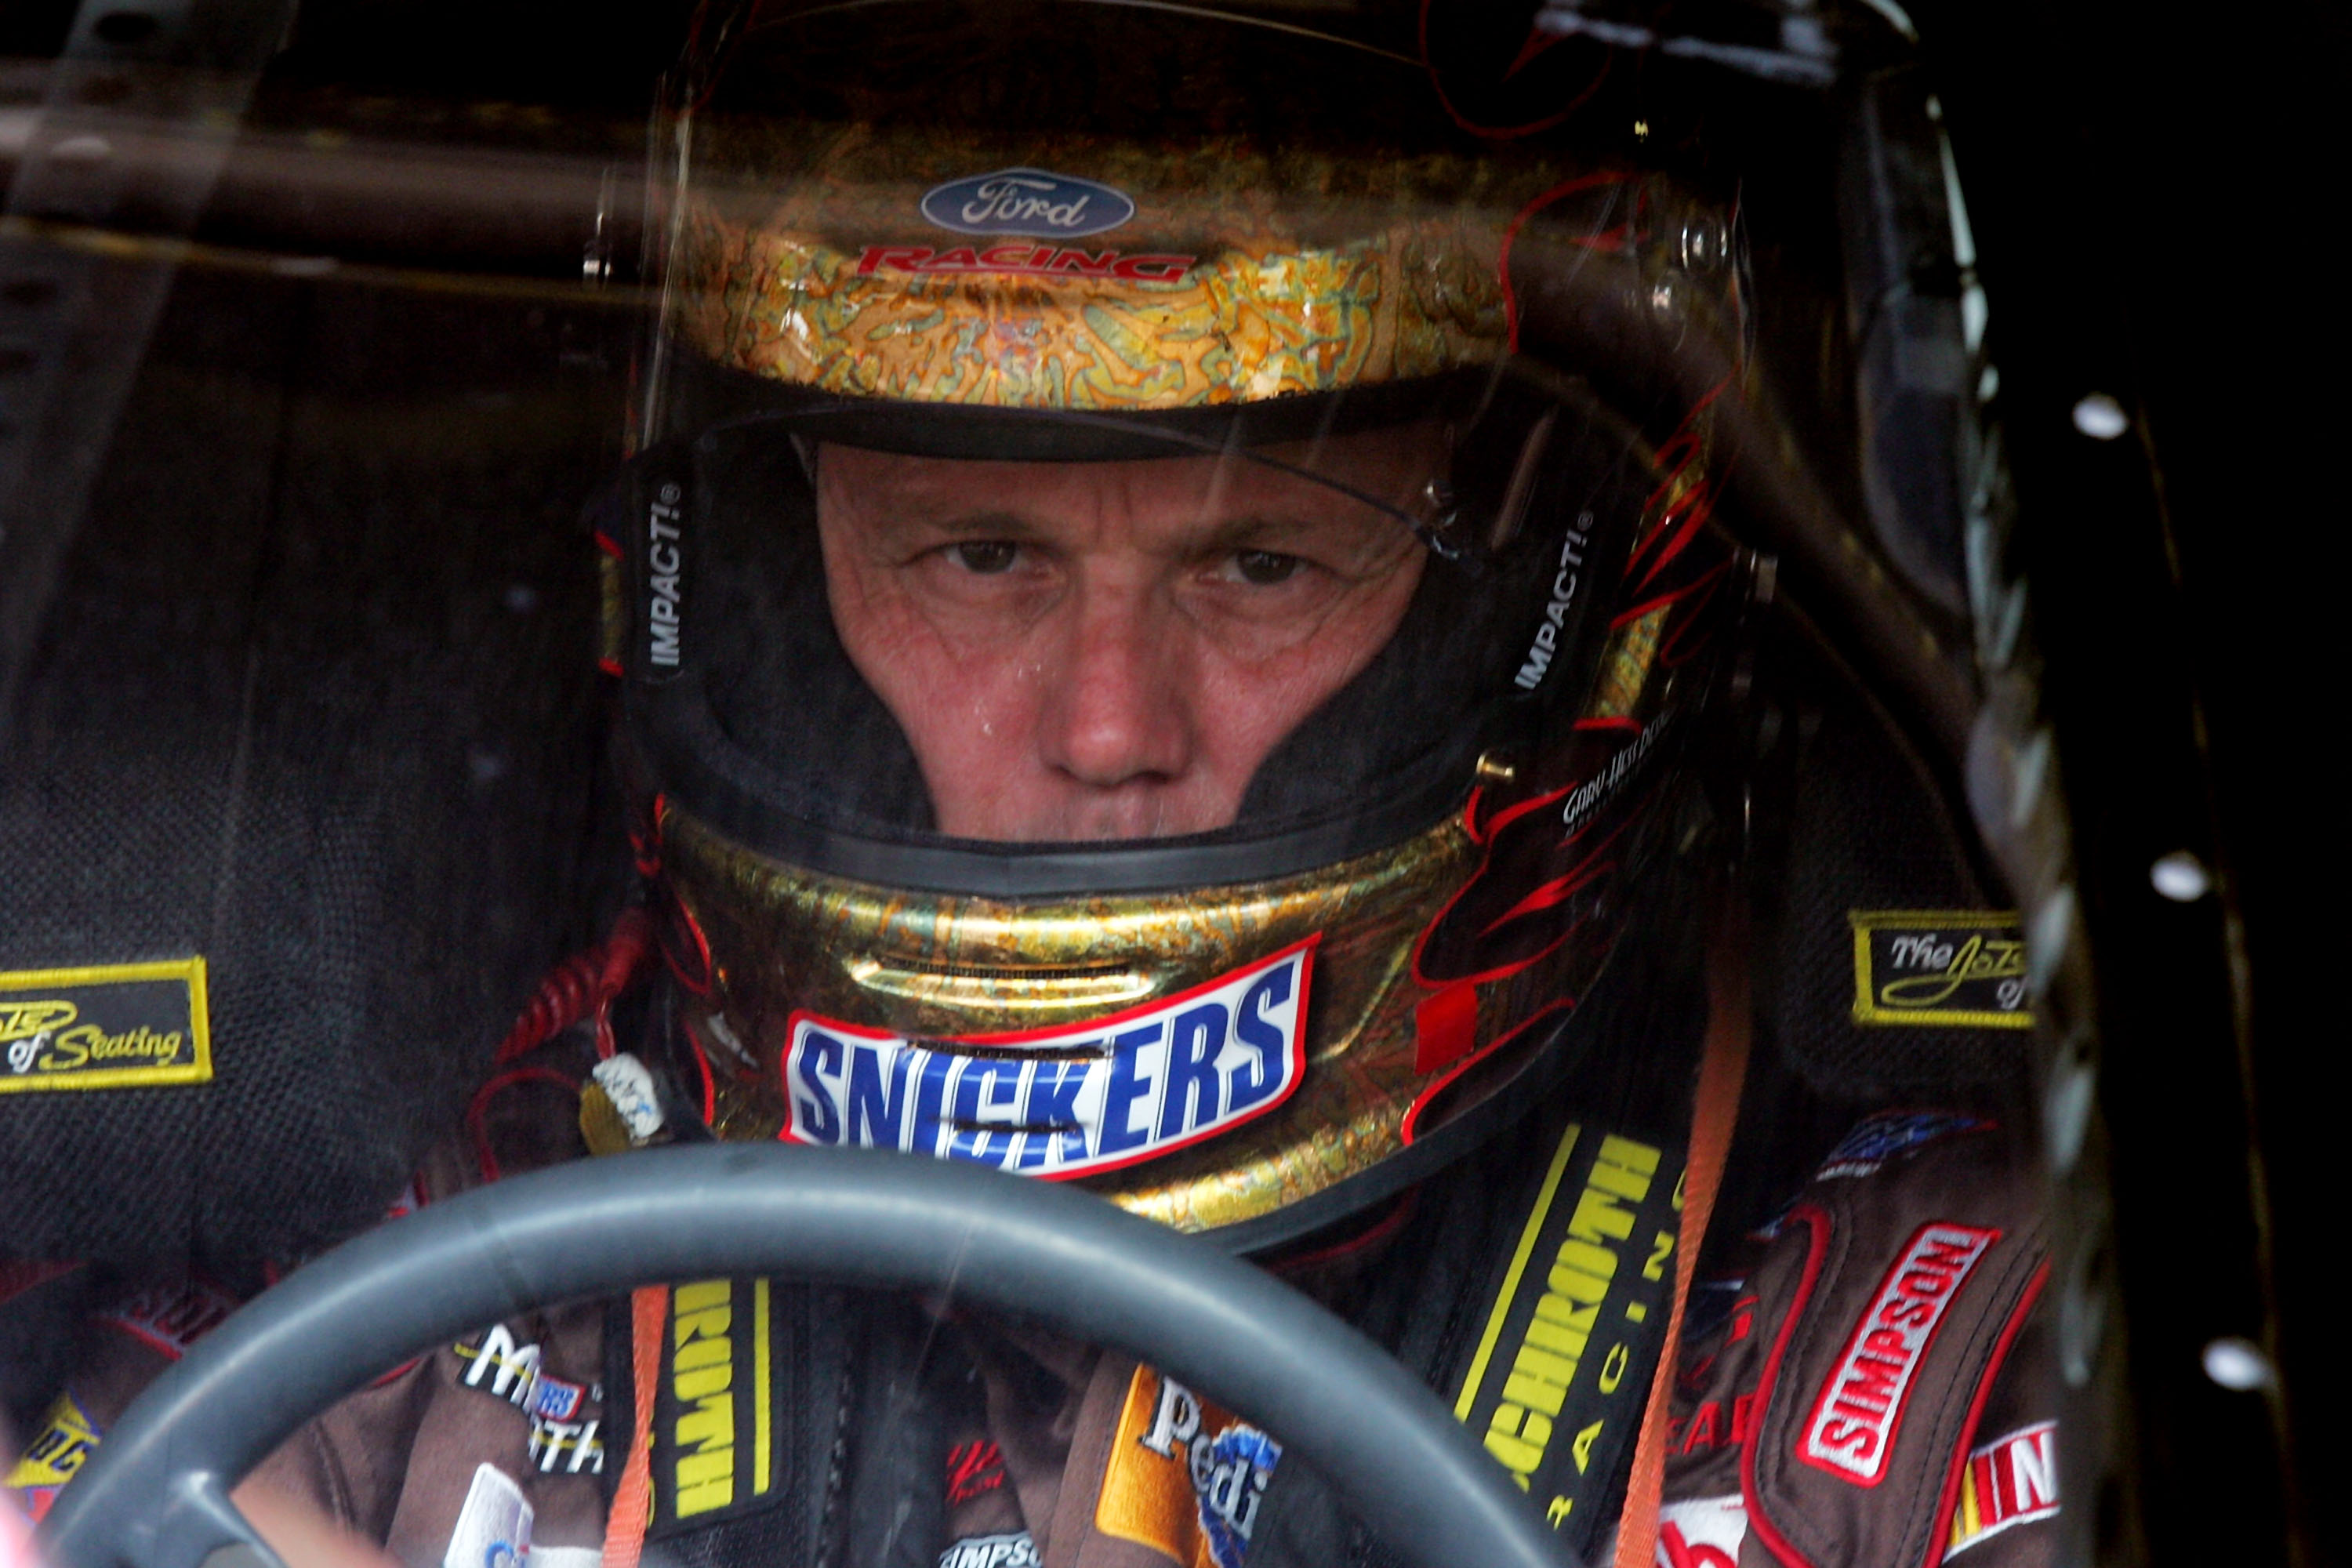 DOVER, DE - JUNE 01: Ricky Rudd, driver of the #88 Snickers Ford, sits in his car during practice for the NASCAR Nextel Cup Series Autism Speaks 400 on June 1, 2007 at Dover International Speedway in Dover, Delaware.  (Photo by Chris McGrath/Getty Images)